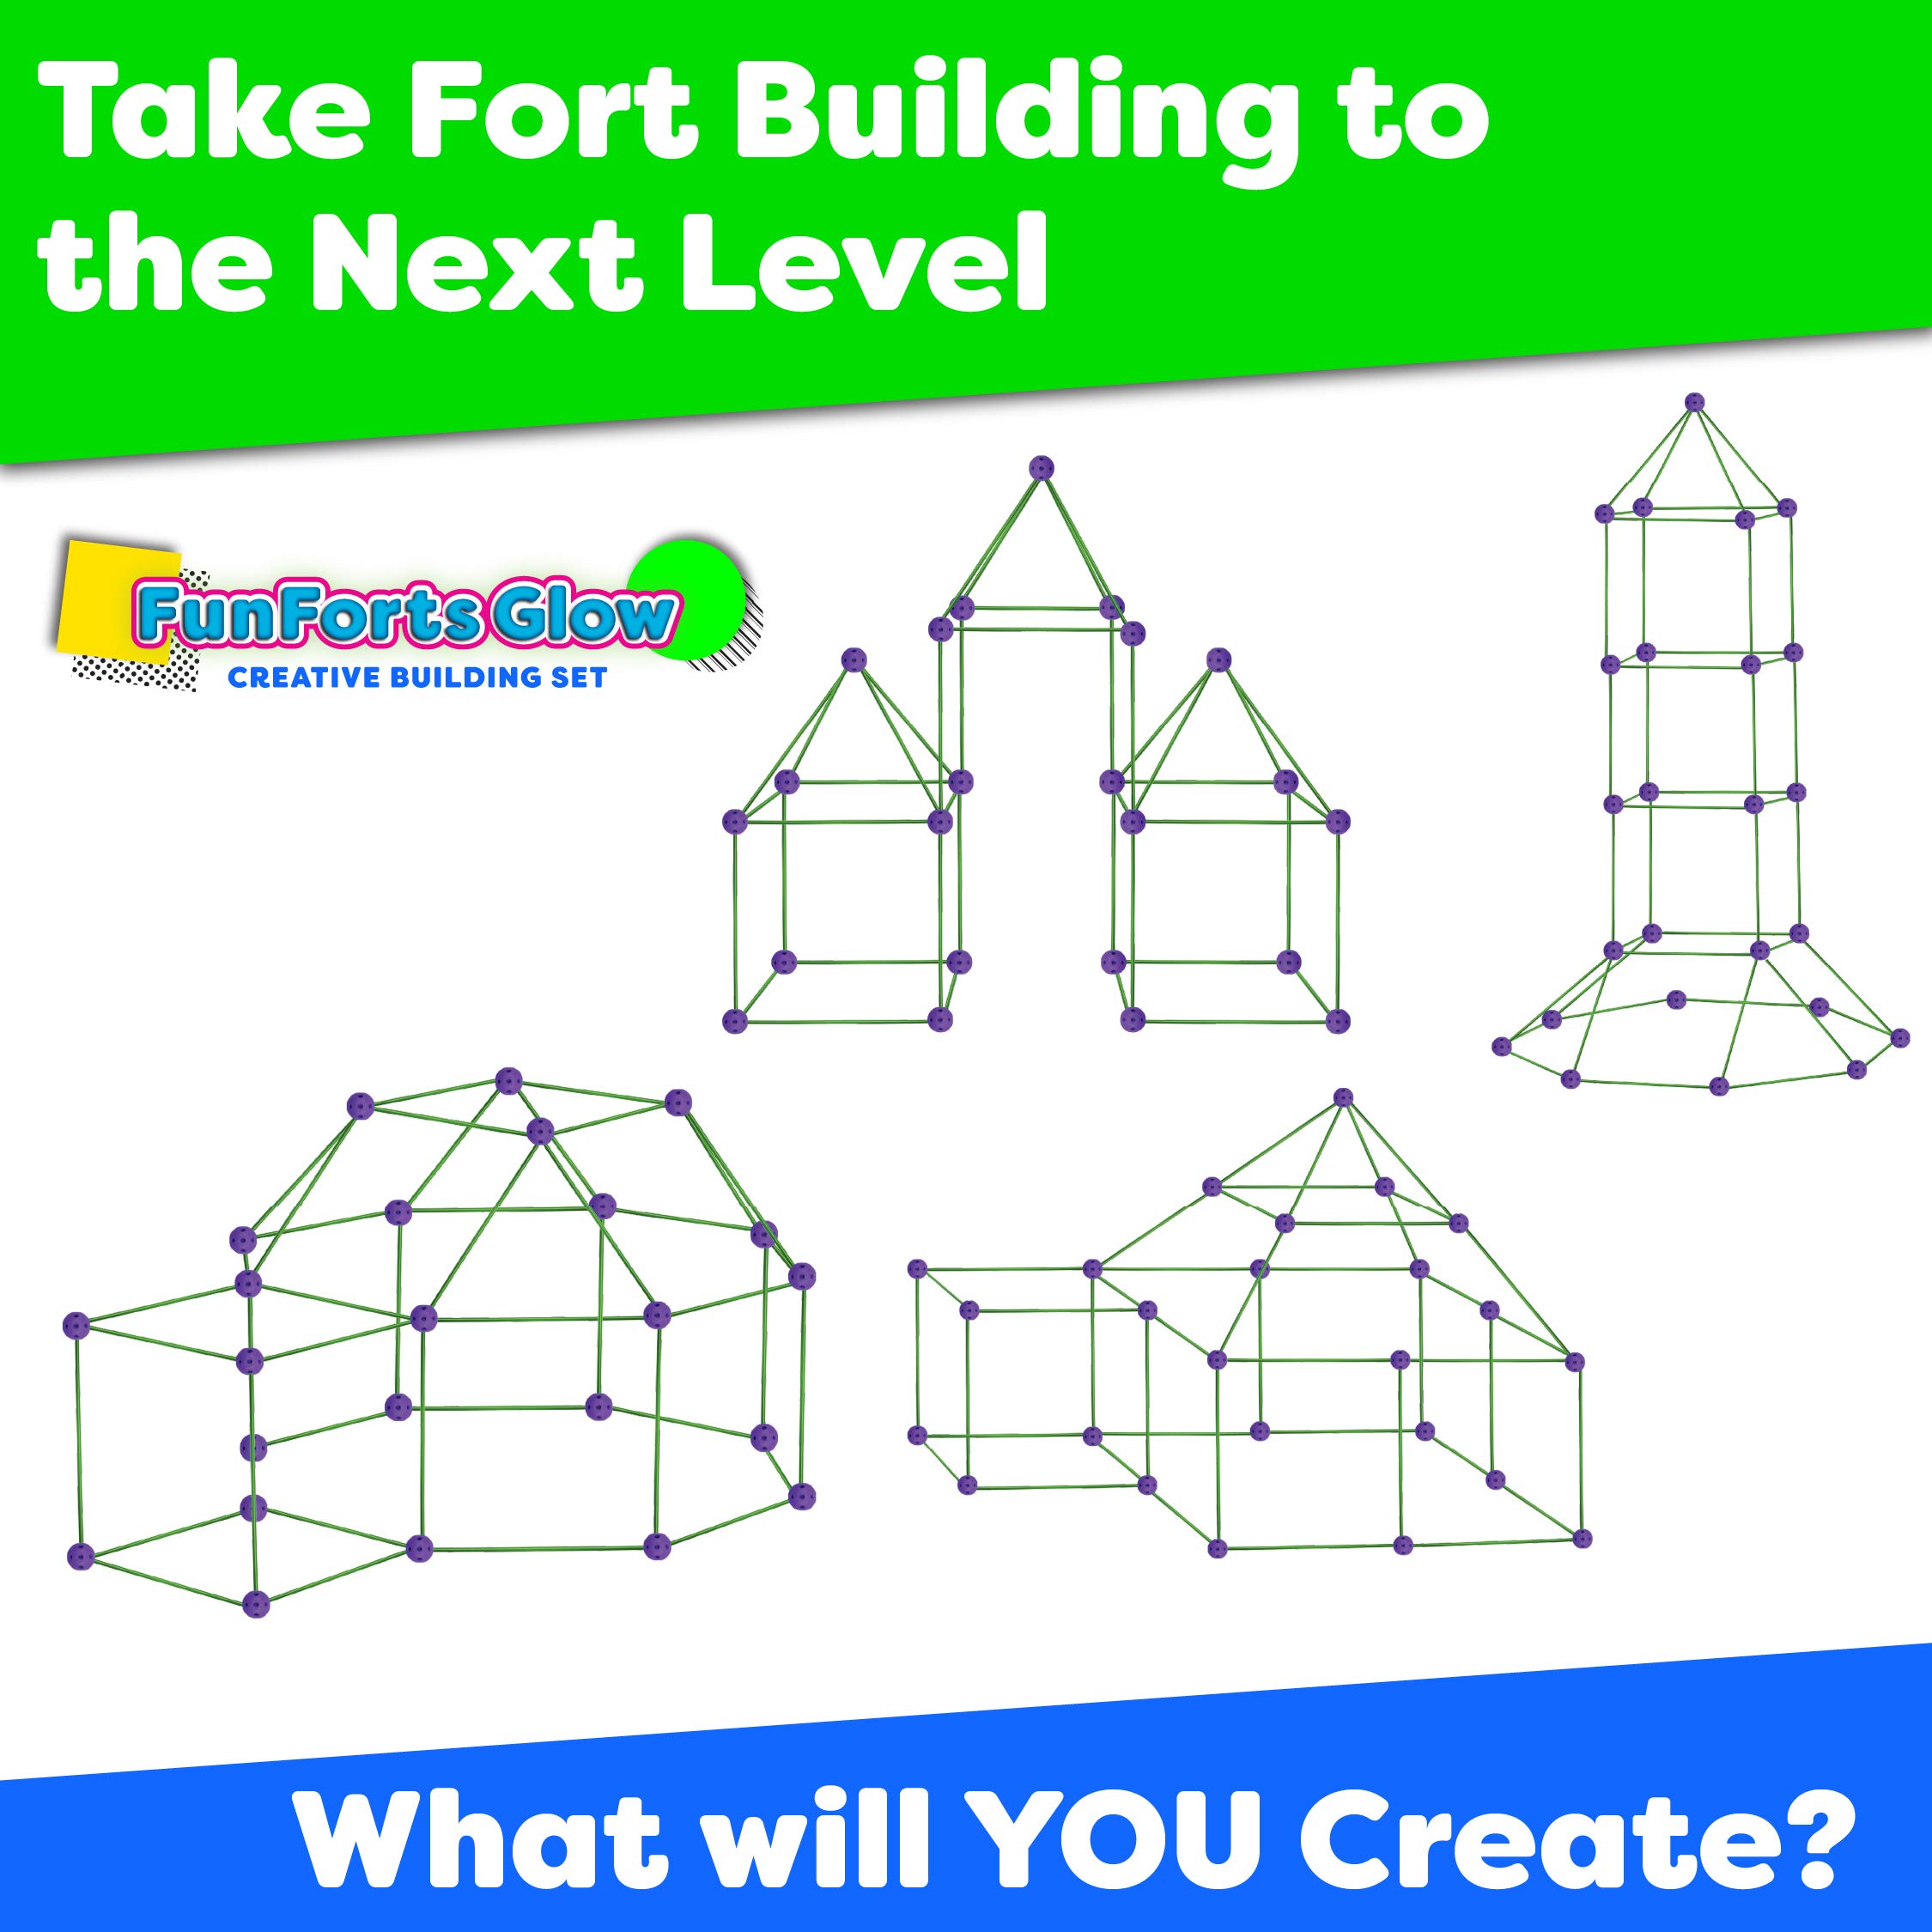 Fun Forts Glow Fort Building Kit for Kids - 81 Pack Glow in The Dark STEM Building Toys Indoor Outdoor Play Tent for Kids Construction Toys with 53 Rods and 28 Spheres